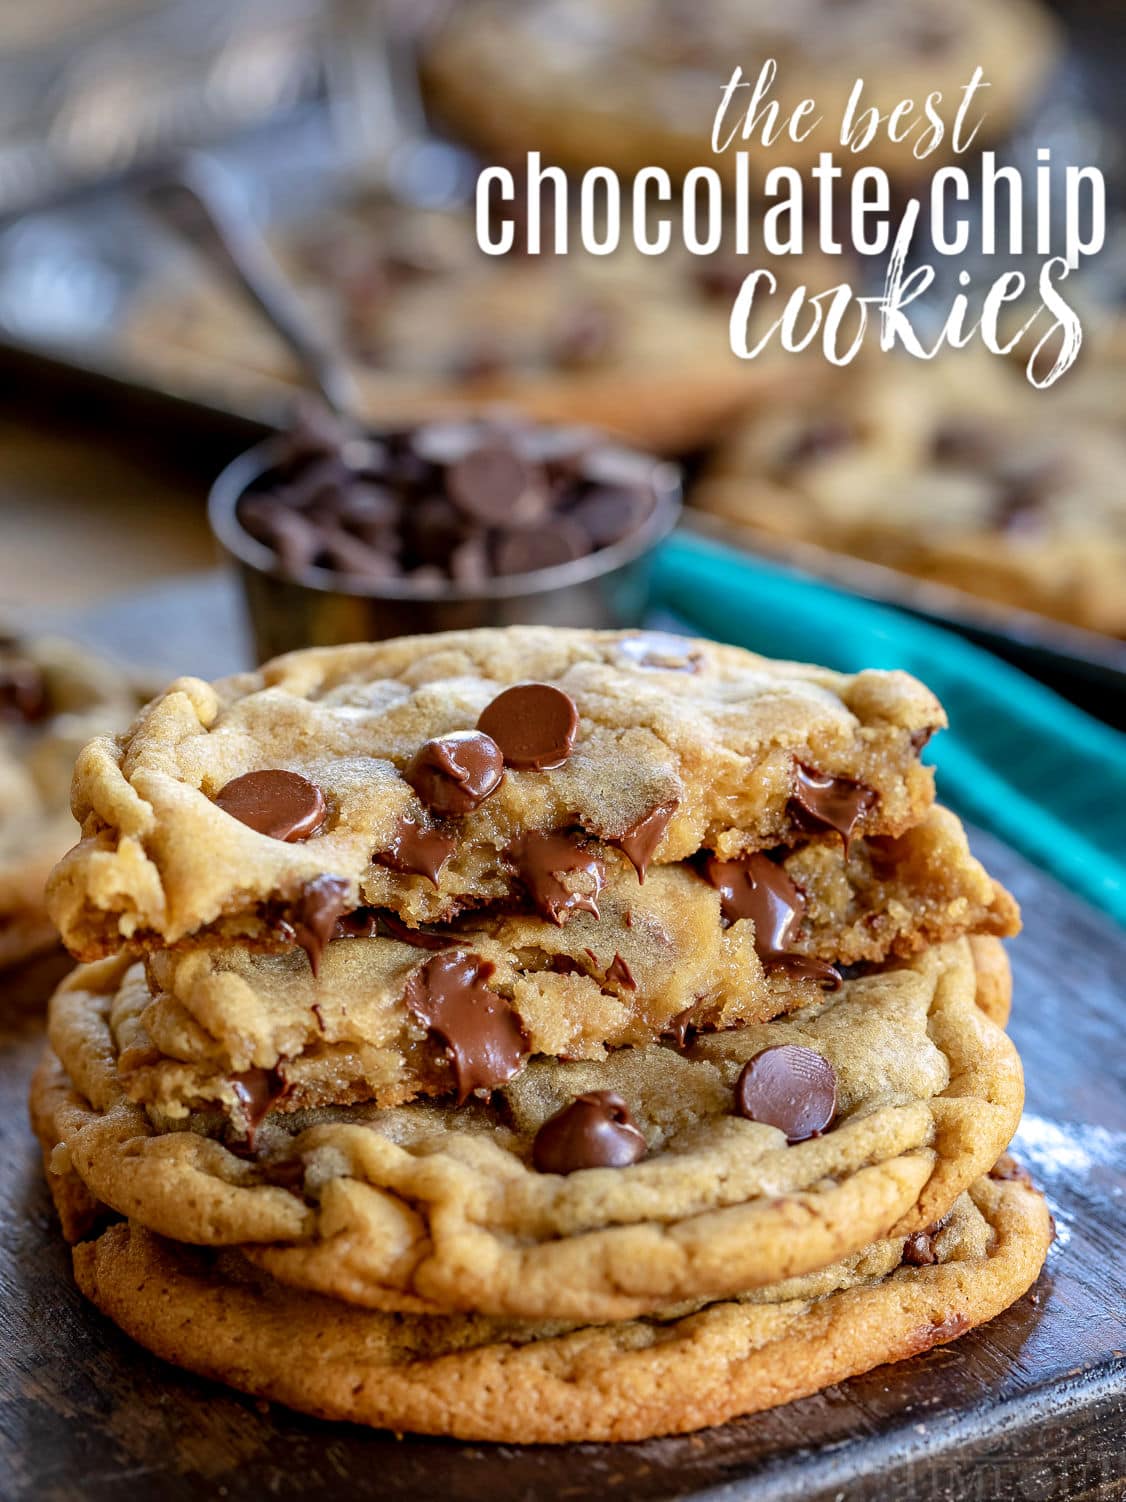 https://www.momontimeout.com/wp-content/uploads/2020/06/chewy-chocolate-chip-cookie-recipe-.jpg